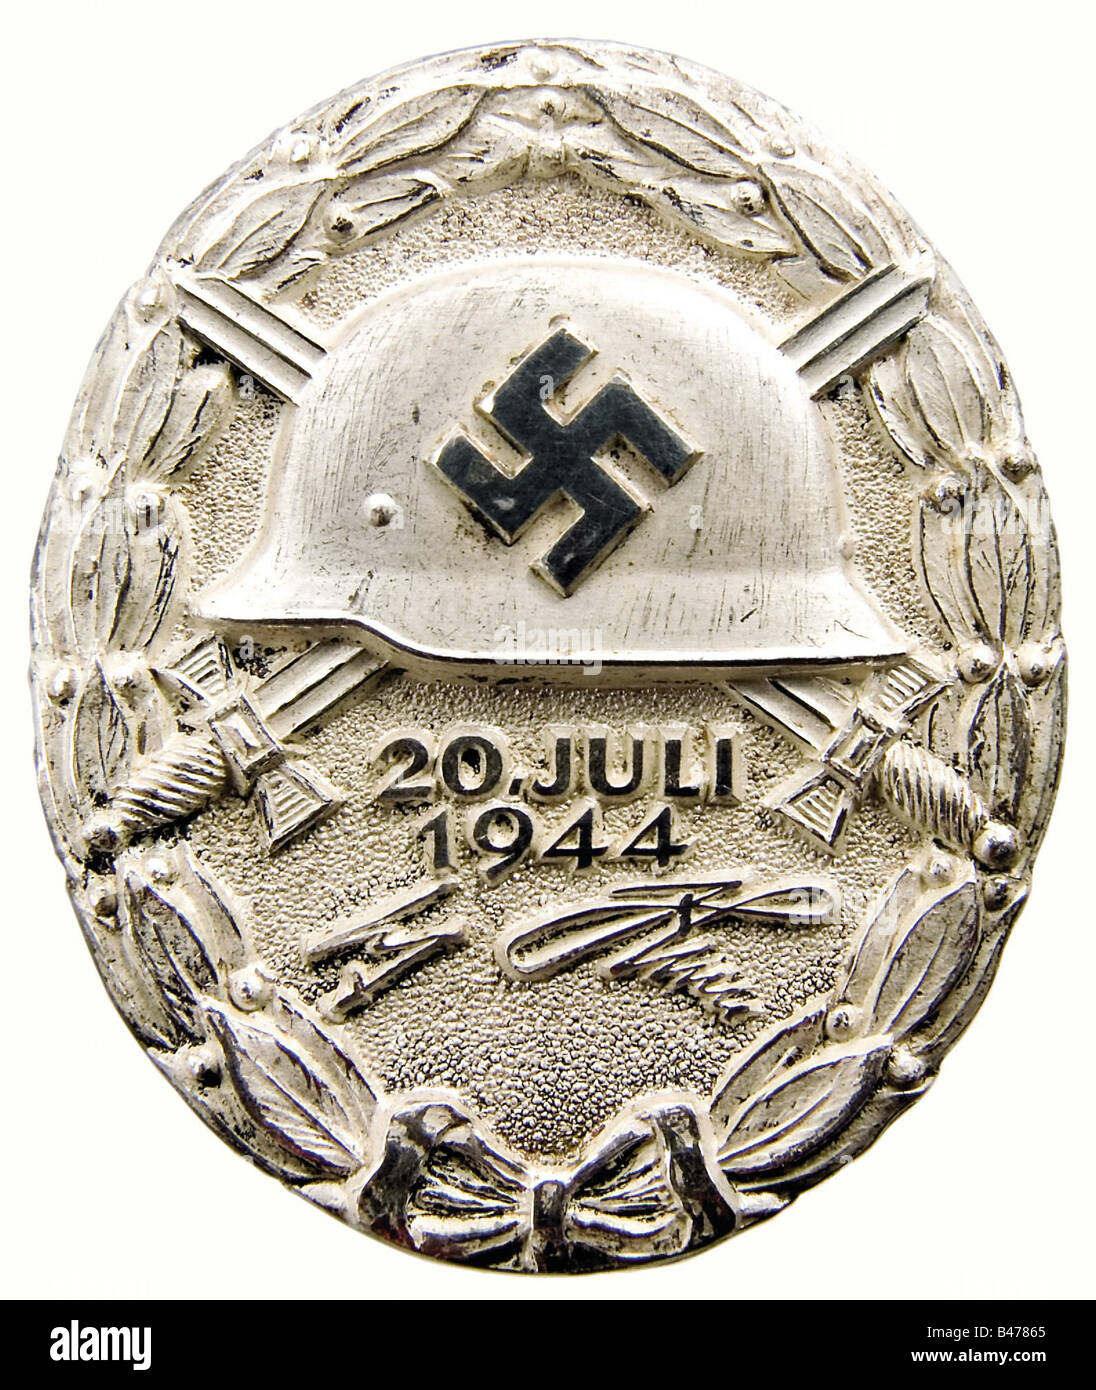 A Wound Badge '20 July 1944' in Silver., As new in the original presentation case. Massive silver, partially polished. Marked 'L/12' on the back for C.E. Juncker, Berlin along with the silver hallmark '800'. 44.43 x 37.22 mm. Weight 38.96 grams (OEK 3848). Original black presentation case, lined with black velvet and white silk, magnetic fittings, the catch is missing. Extremely rare, an original has never before been offered for sale. There have only been 23 awards at all three levels, gold, silver, and black. It is certain that two of these were awarded at th, Stock Photo